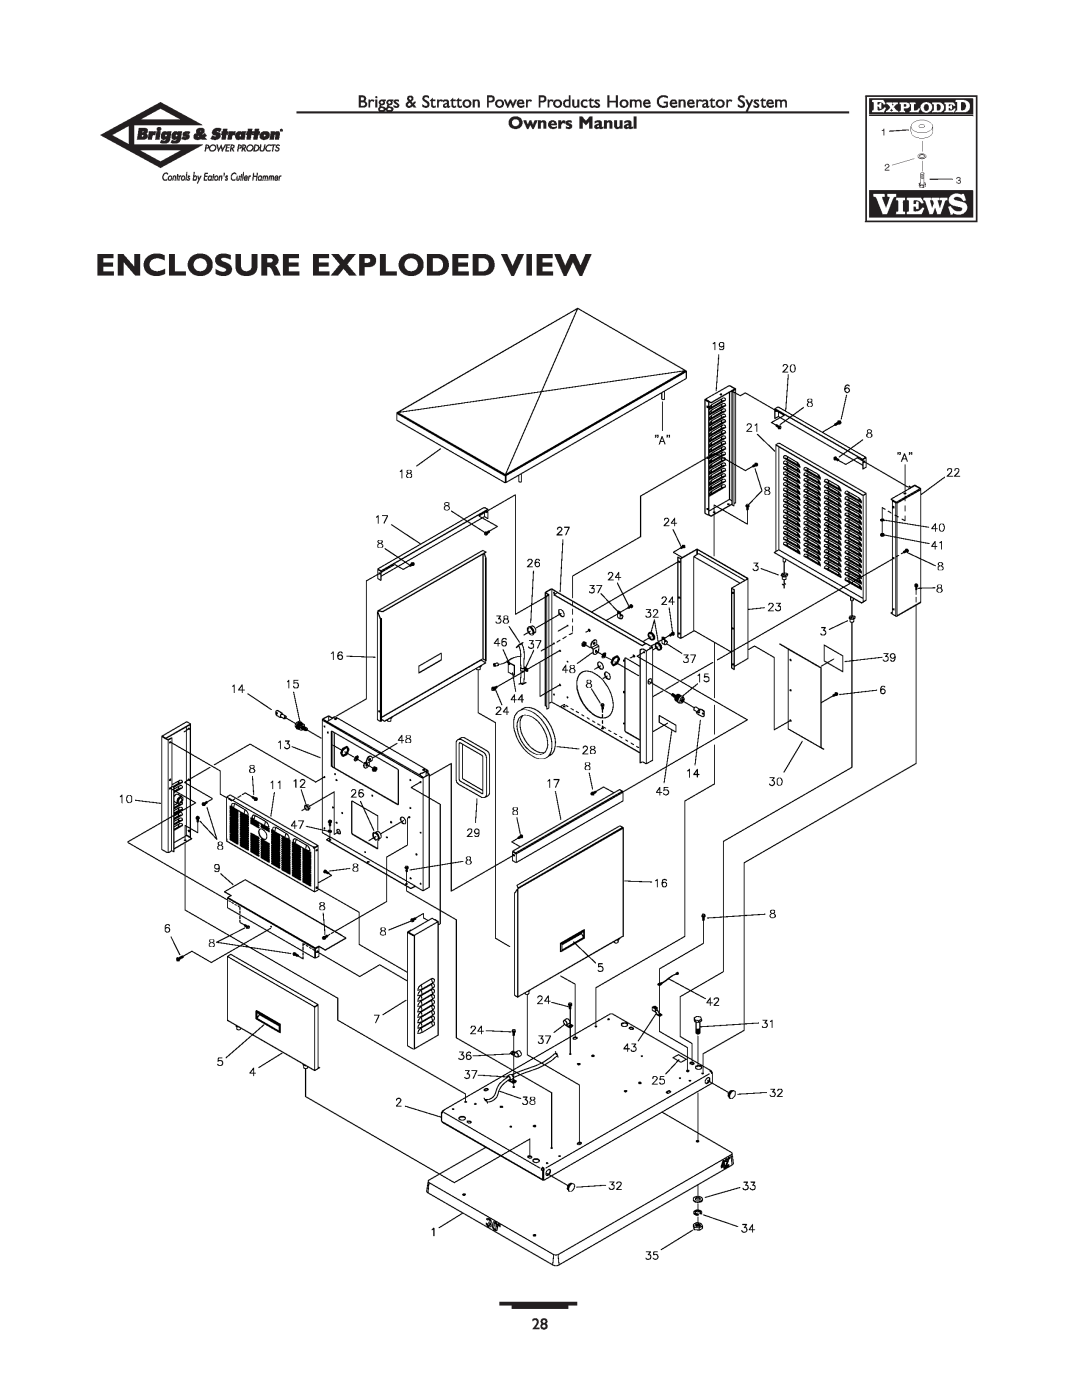 Briggs & Stratton 1679-0 owner manual Enclosure Exploded View, Owners Manual 